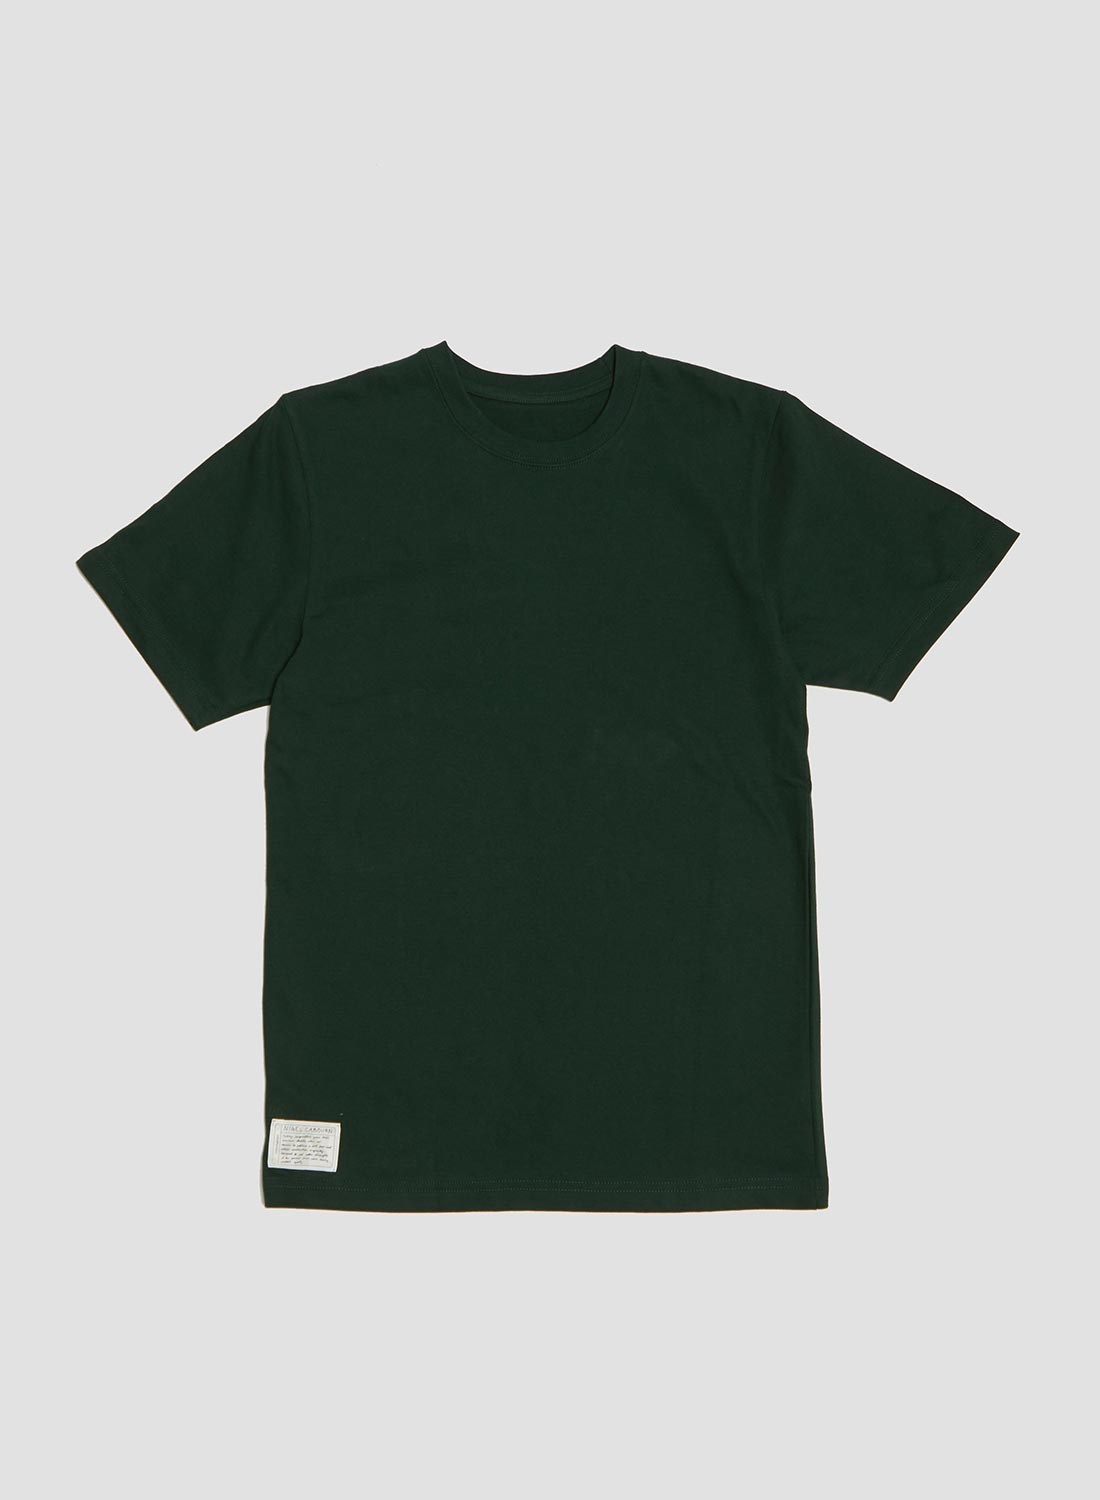 Heavy Duty Athletic T-Shirt in Forest Green - 1